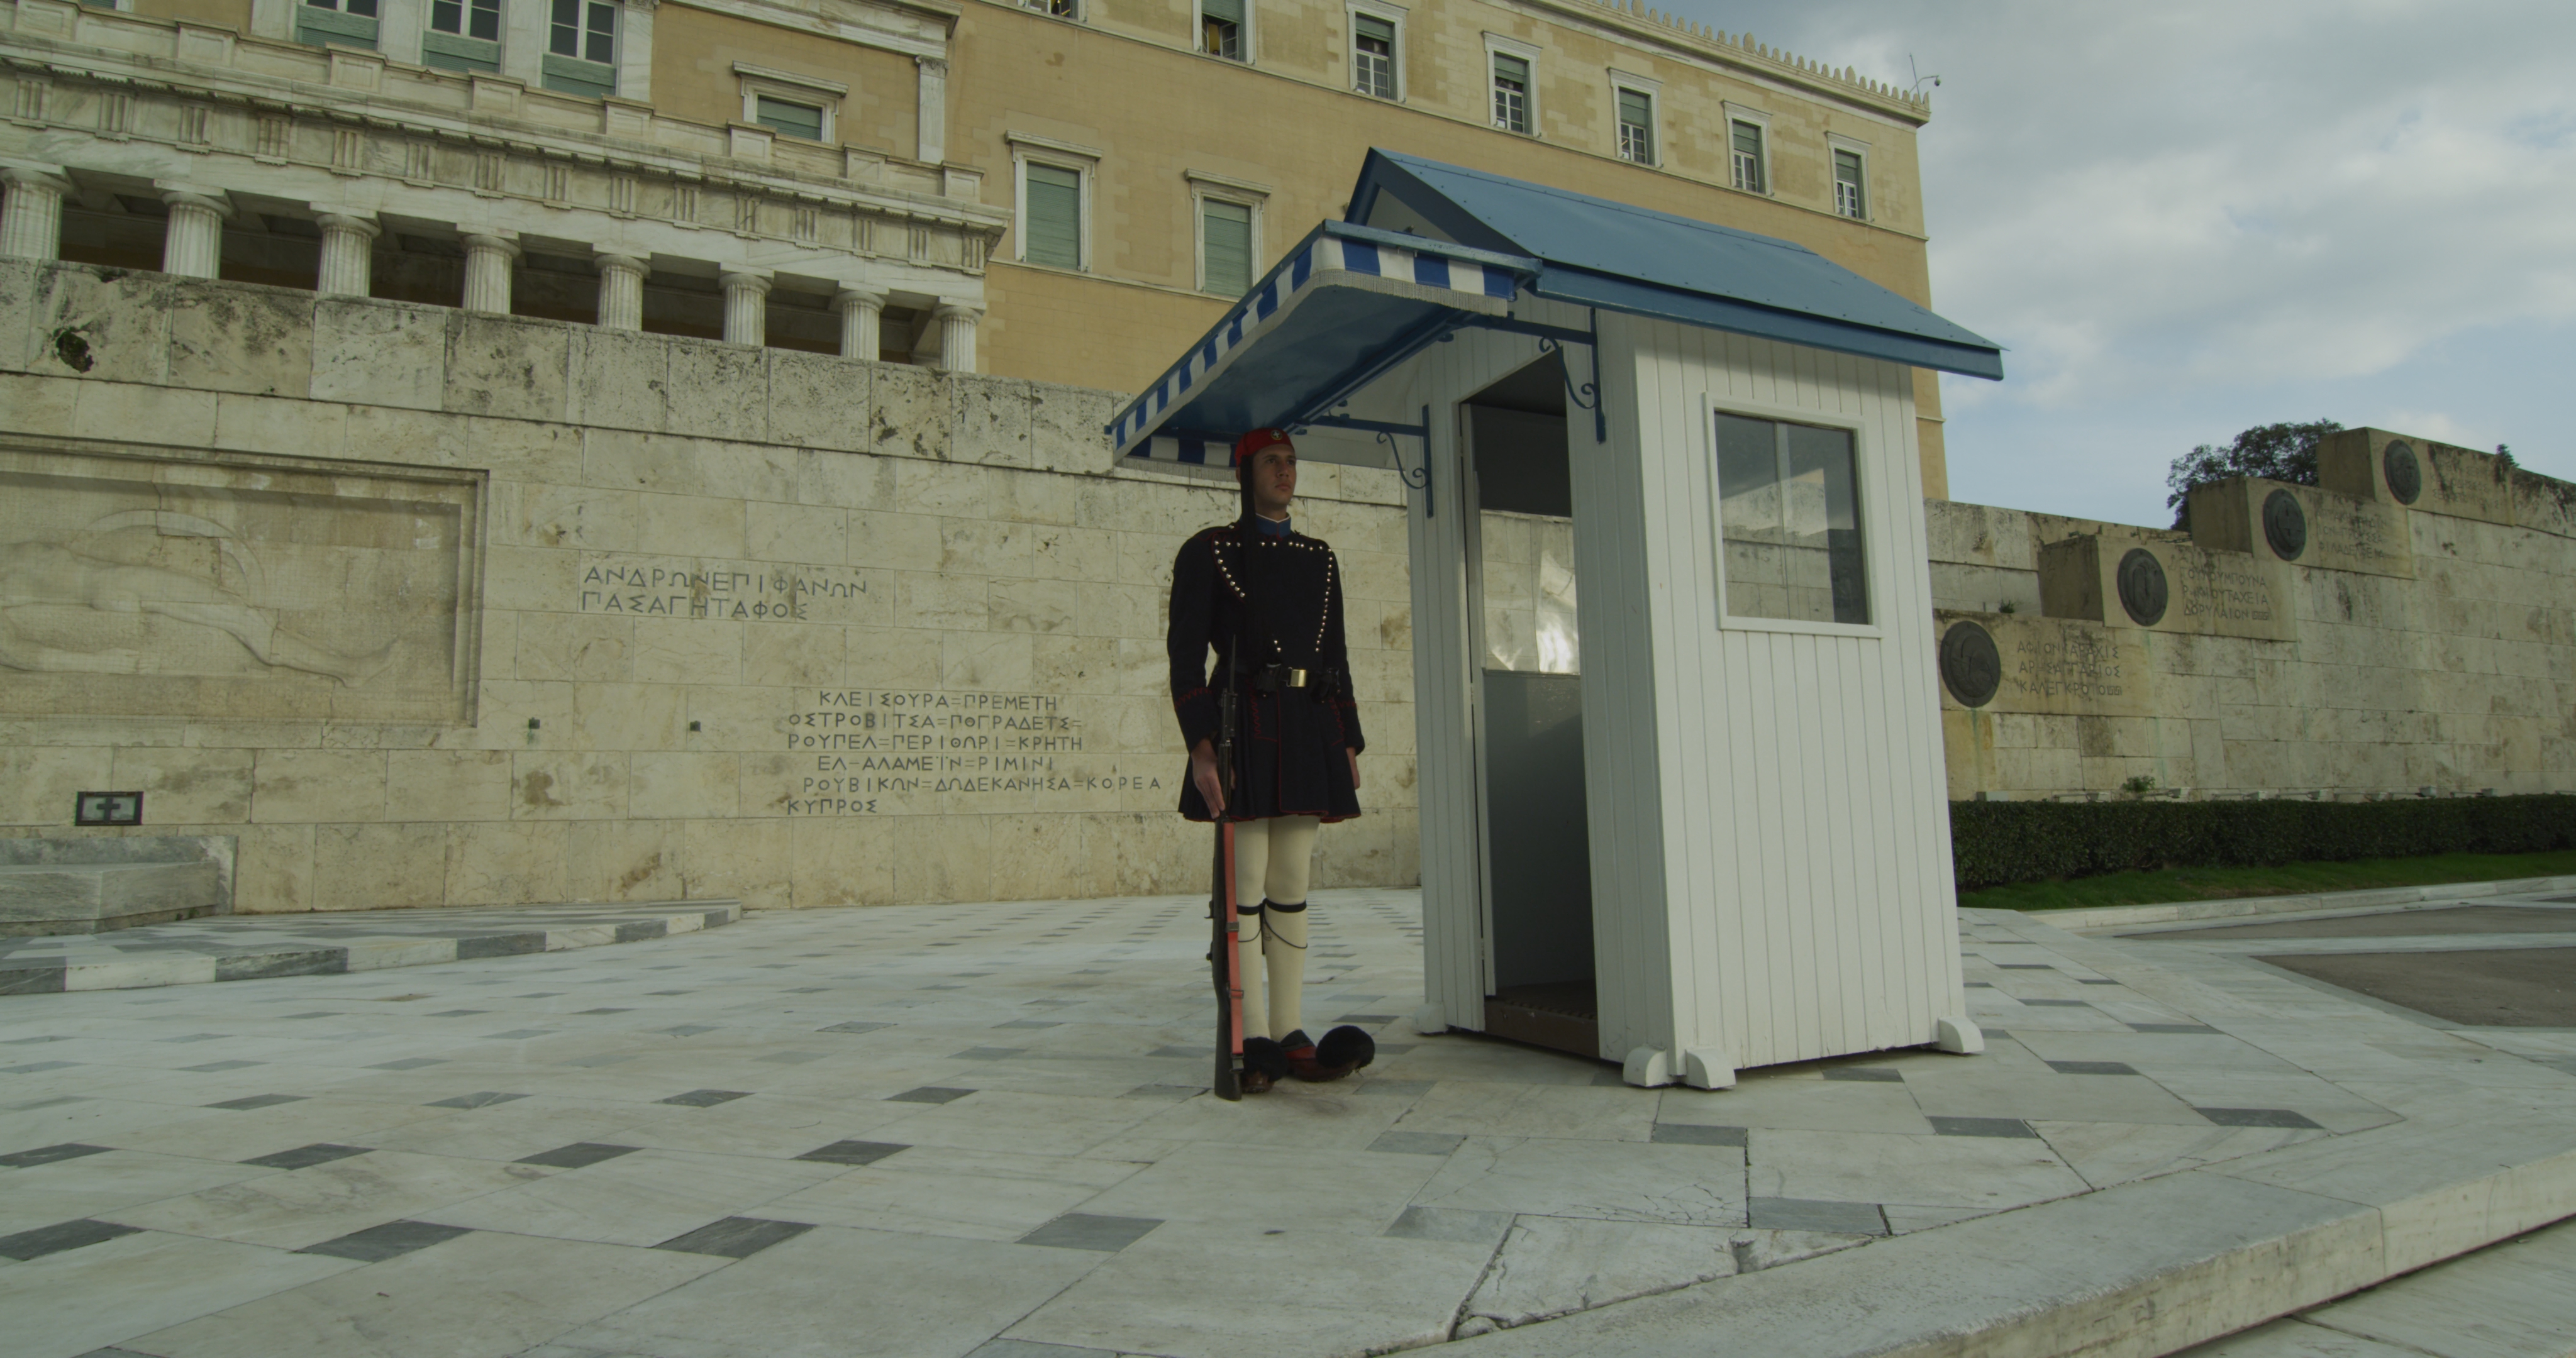 Athens, Greece. From the movie: "THE NEW GREECE"